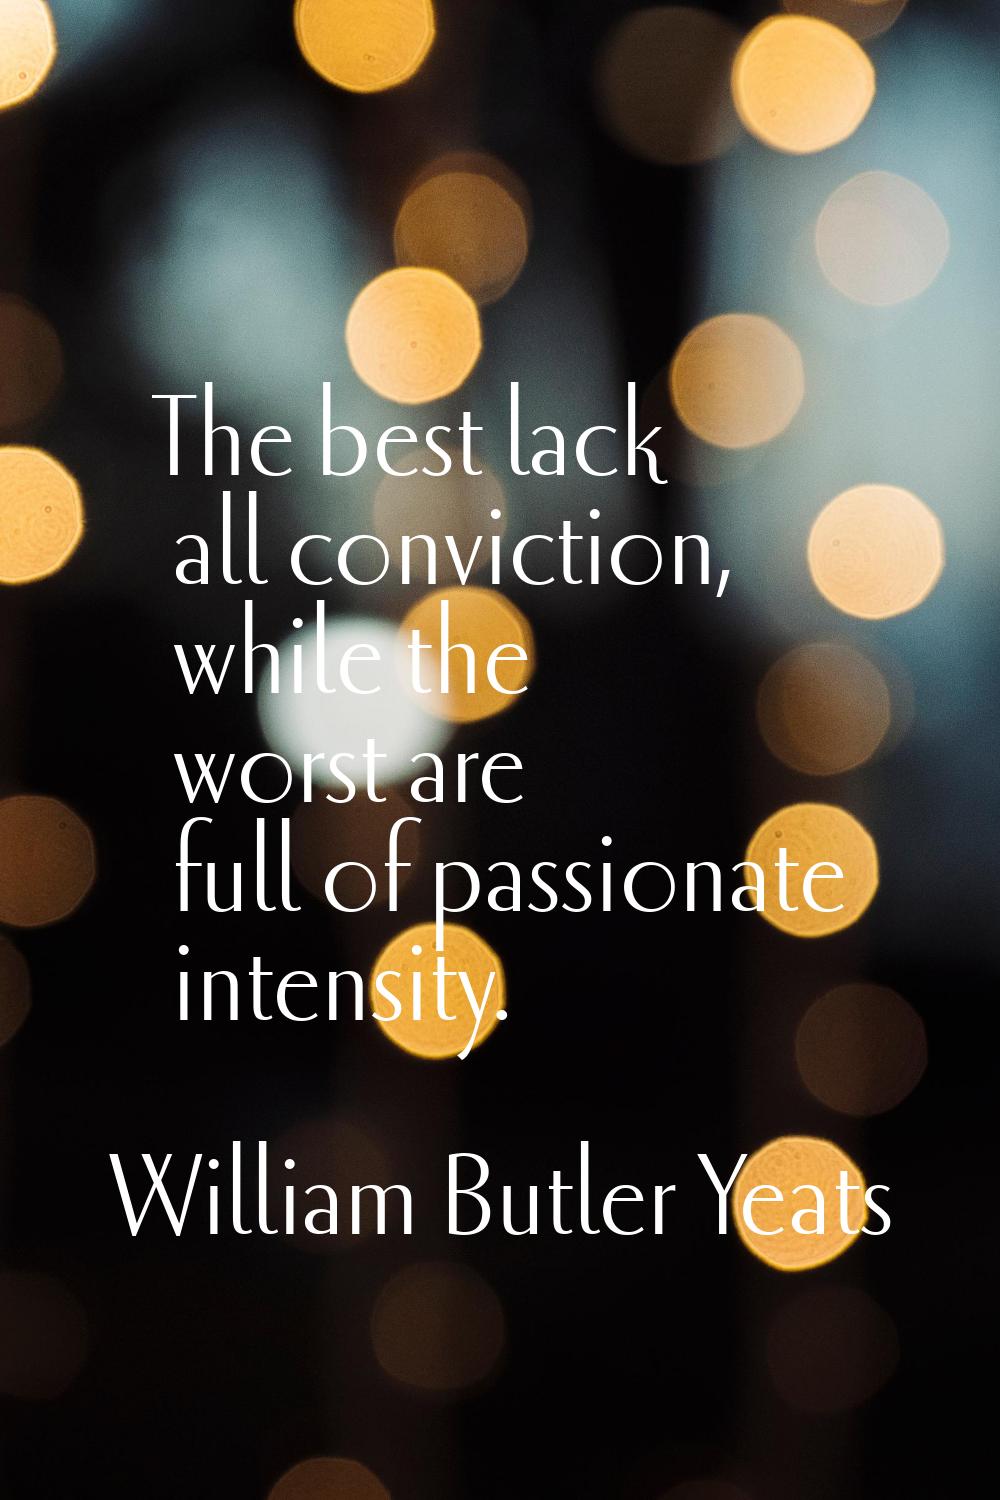 The best lack all conviction, while the worst are full of passionate intensity.